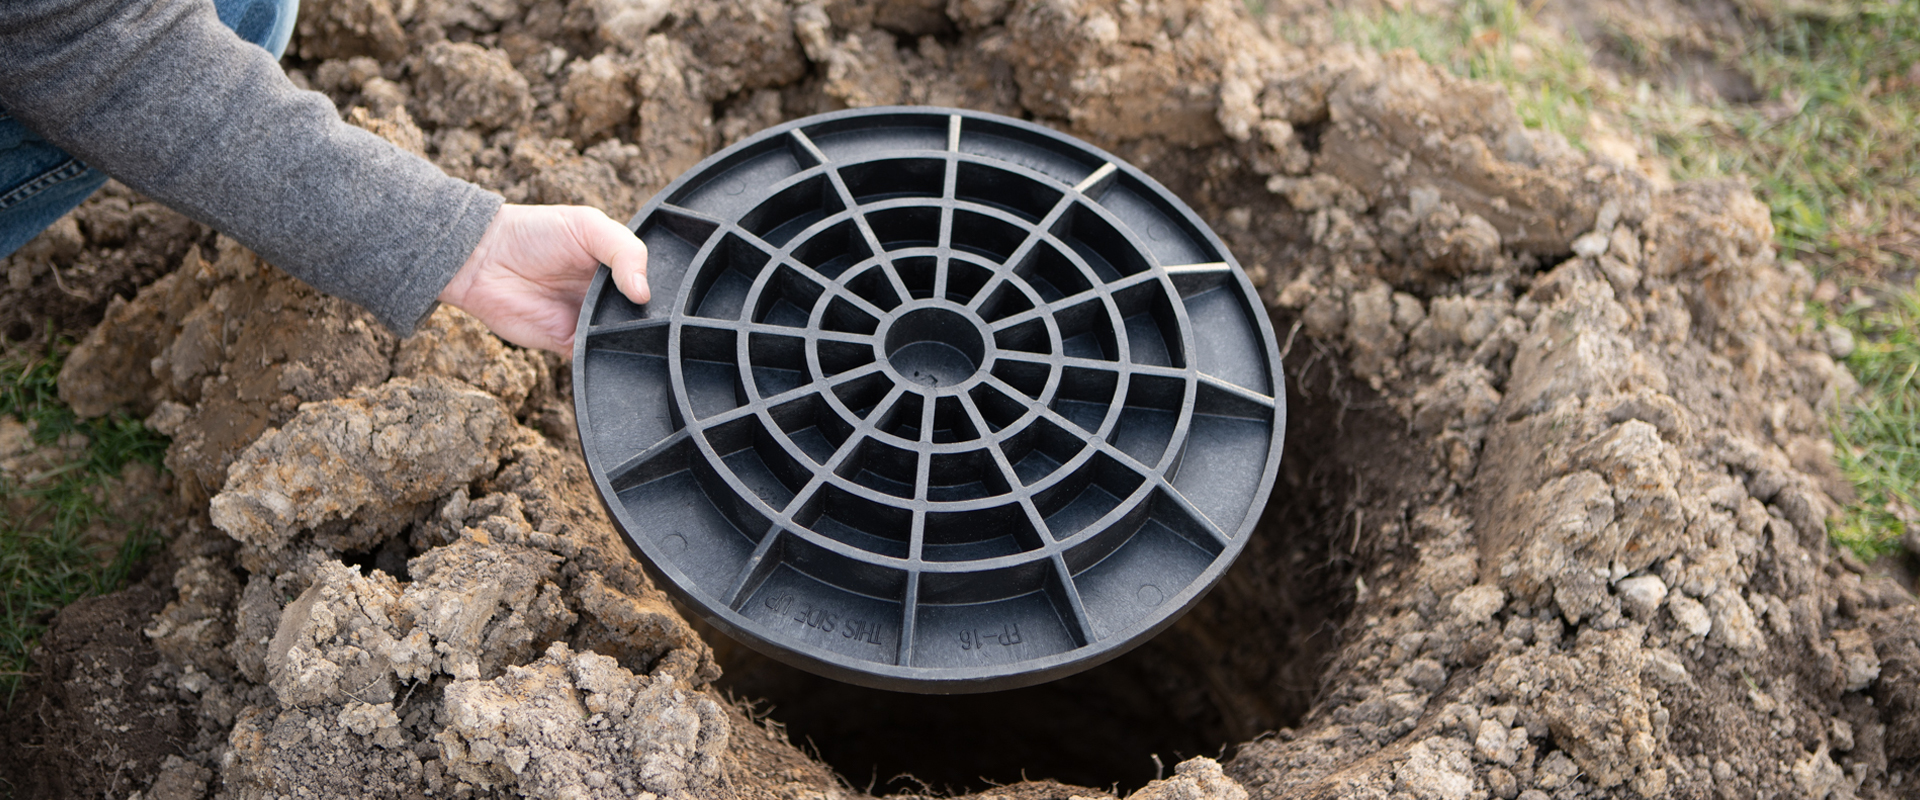 Hand holding a FootingPad as it is placed into a hole in the ground.